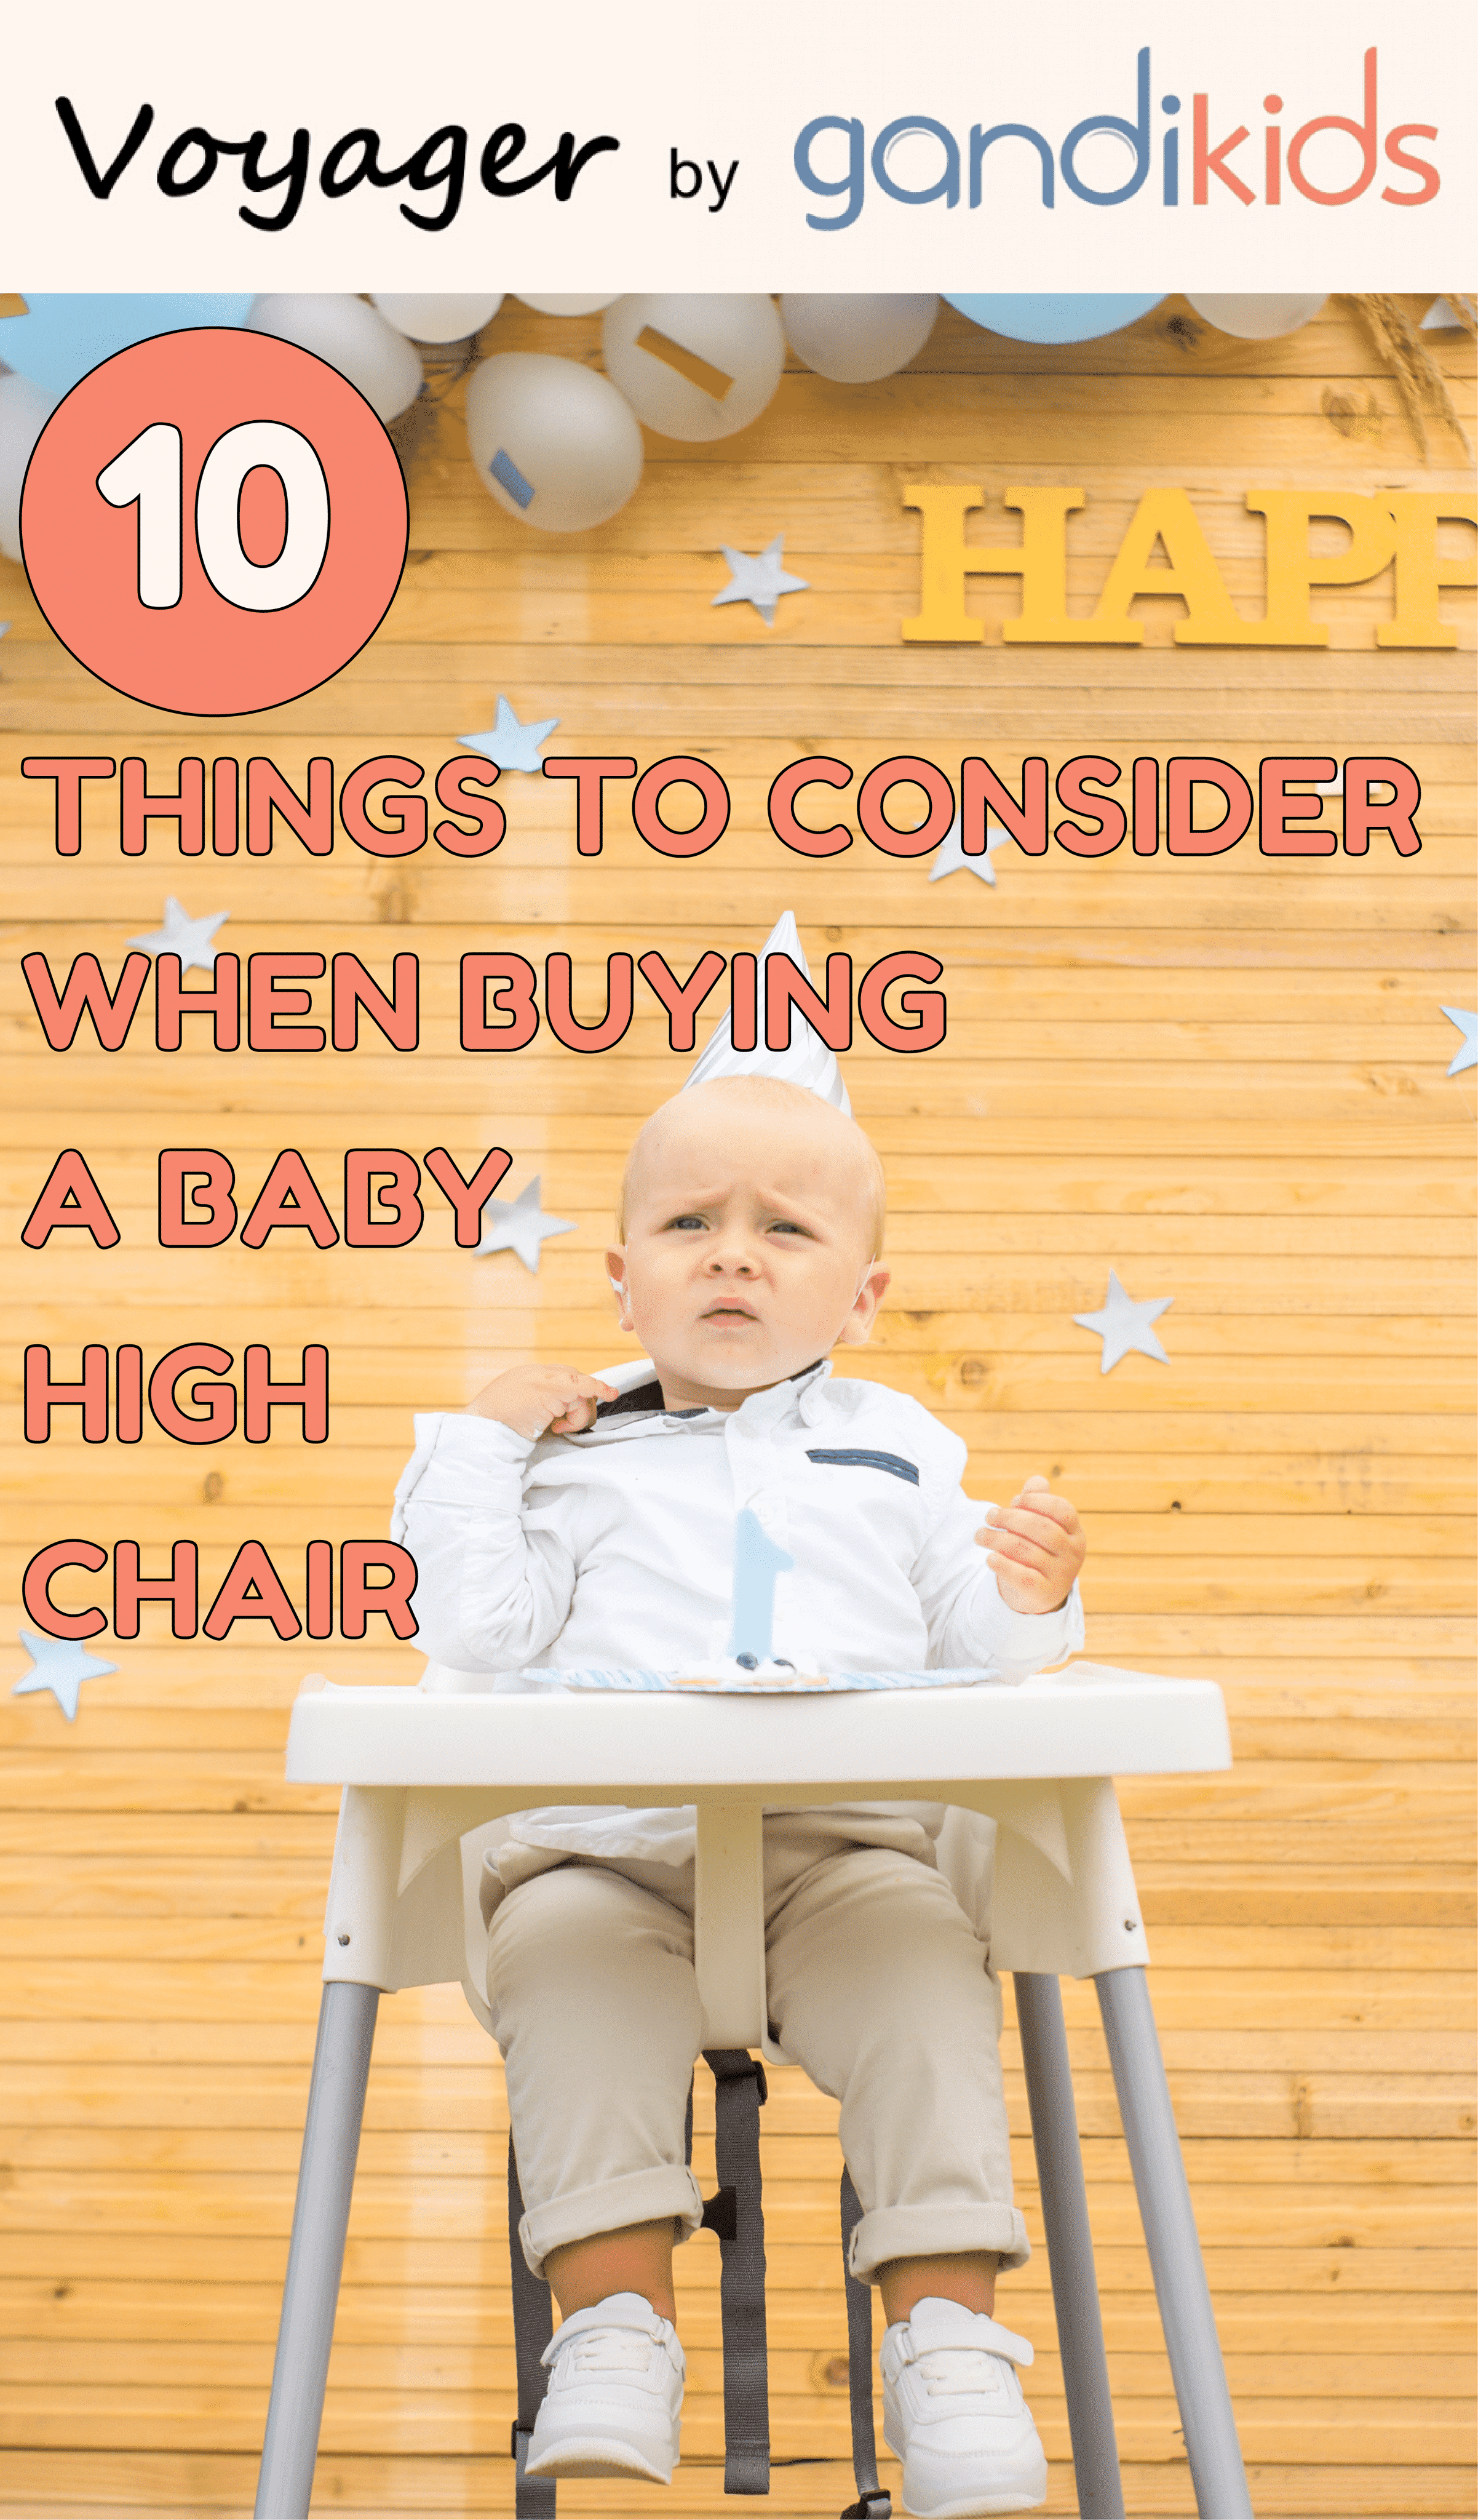 How to choose baby high chair